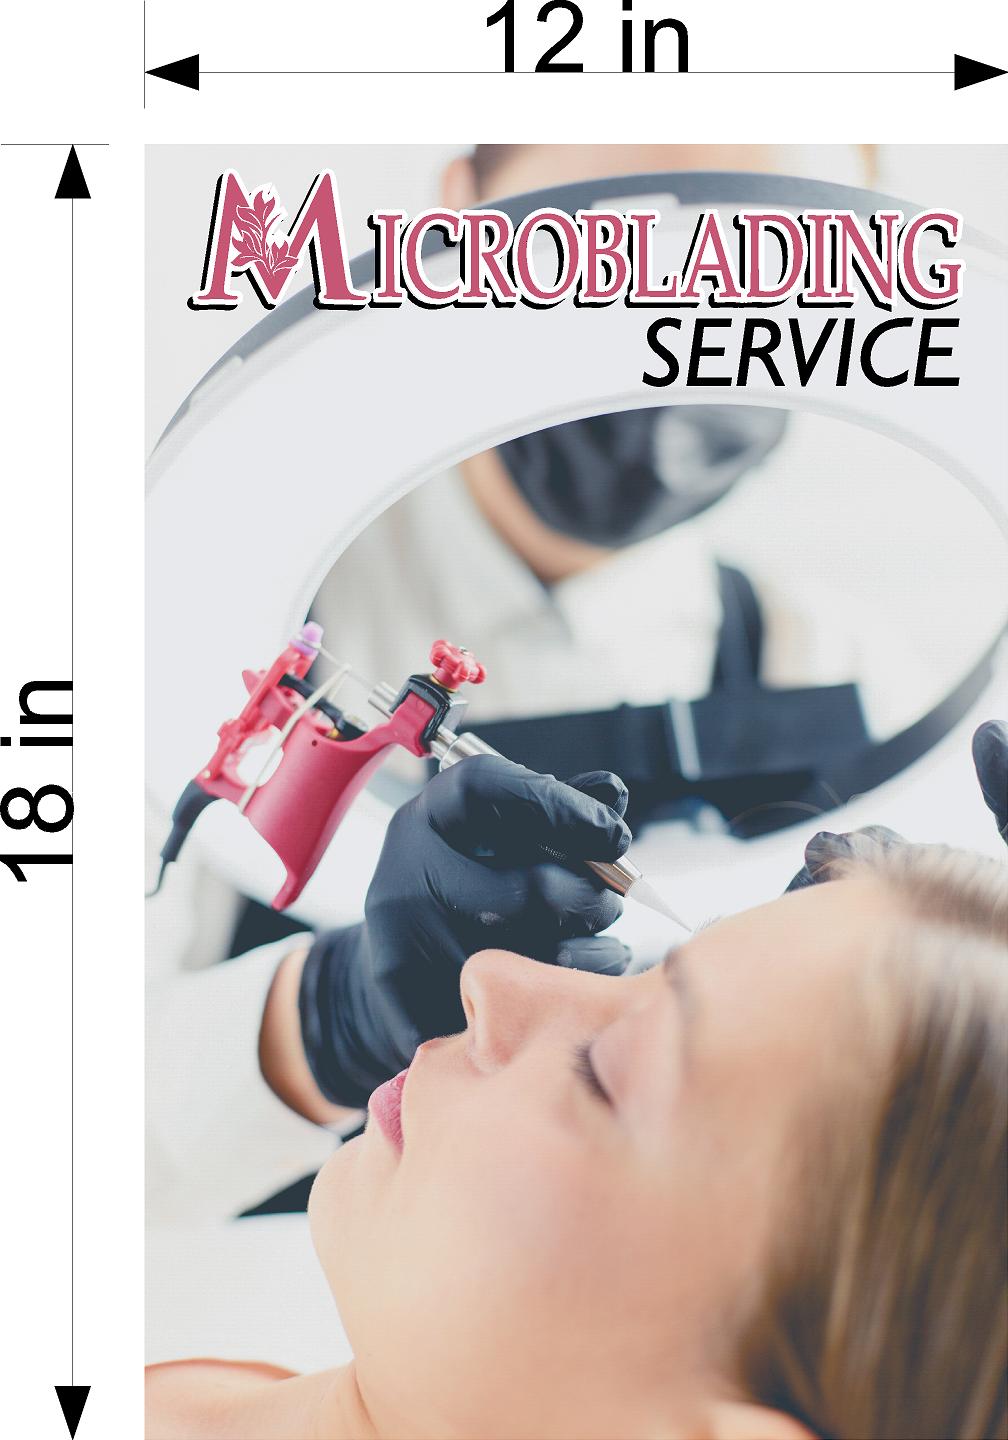 Microblading 17 Wallpaper Fabric Poster with Adhesive Backing Wall Interior Services Permanent Makeup Tattoo Vertical